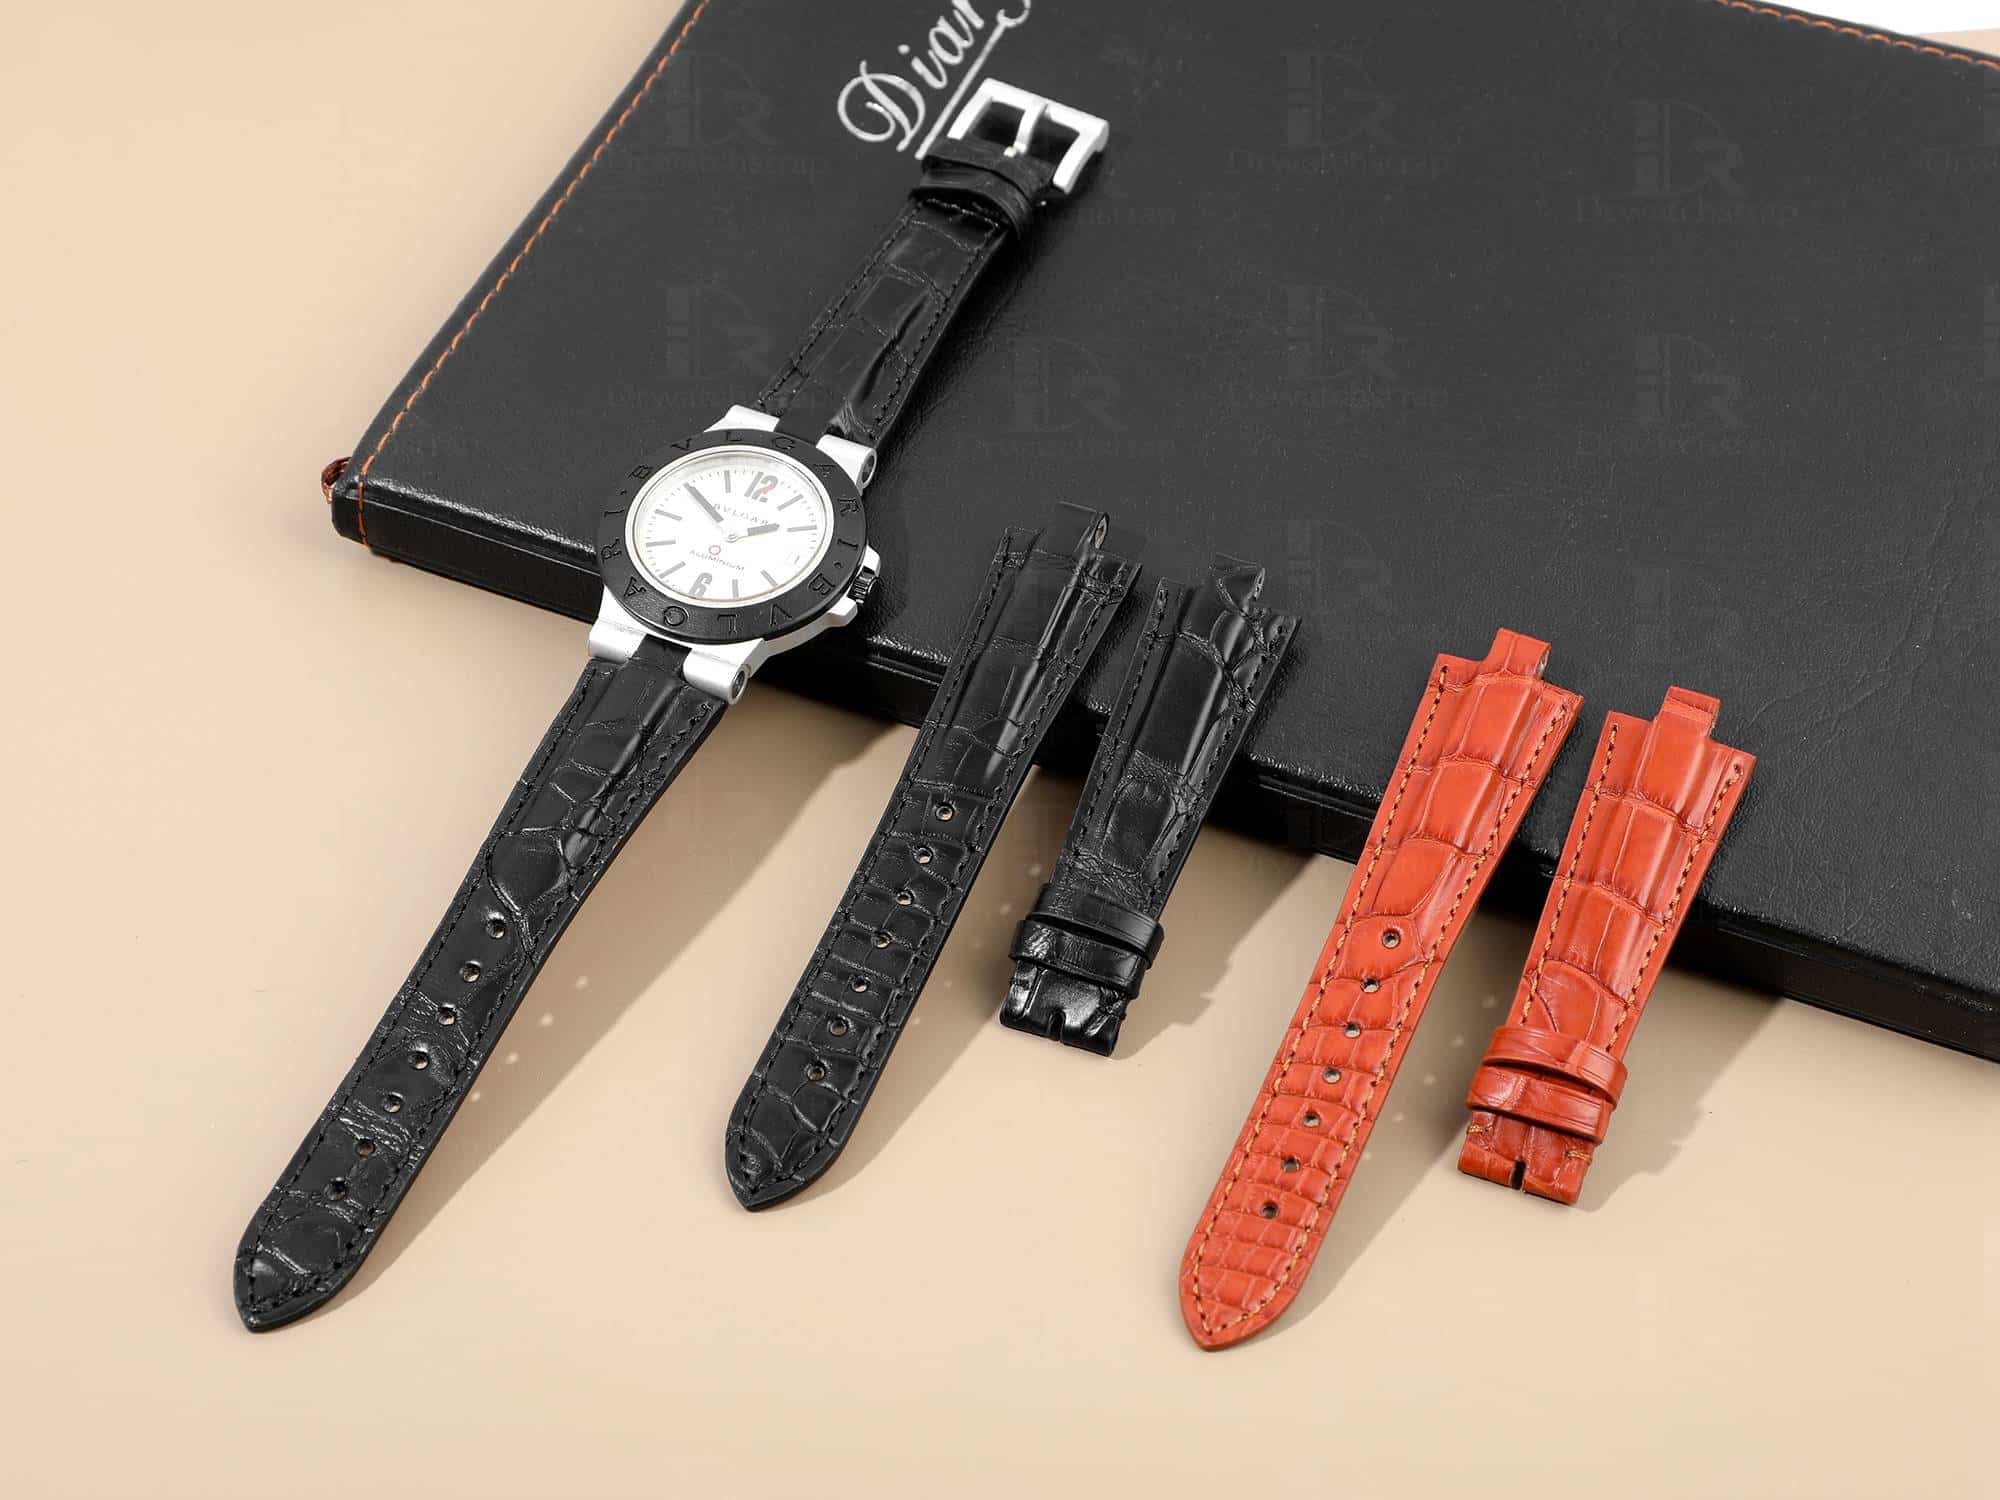 Genuine best quality Belly-scale black brown alligator crocodile custom Bvlgari leather watch strap & watch band replacement for Bvlgari Diagono Aluminium AL38A L3276 mens and women's luxury watch - OEM aftermarket high-end straps and watchbands online at a low price from dr watchstrap